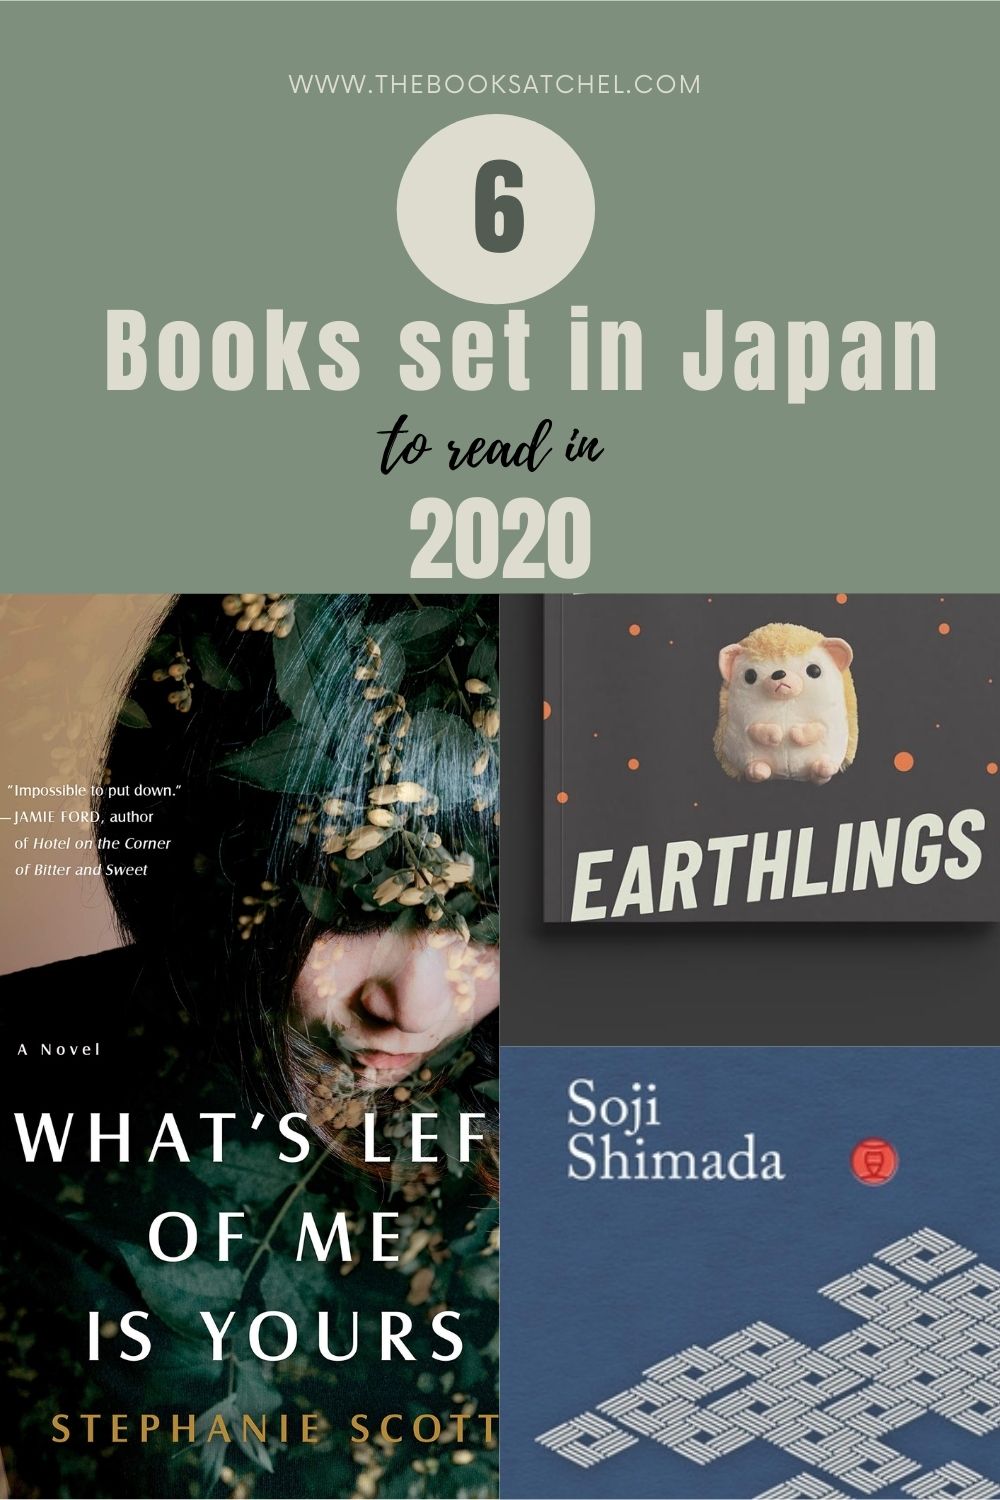 6 Books From Japan To Read In The Book Satchel